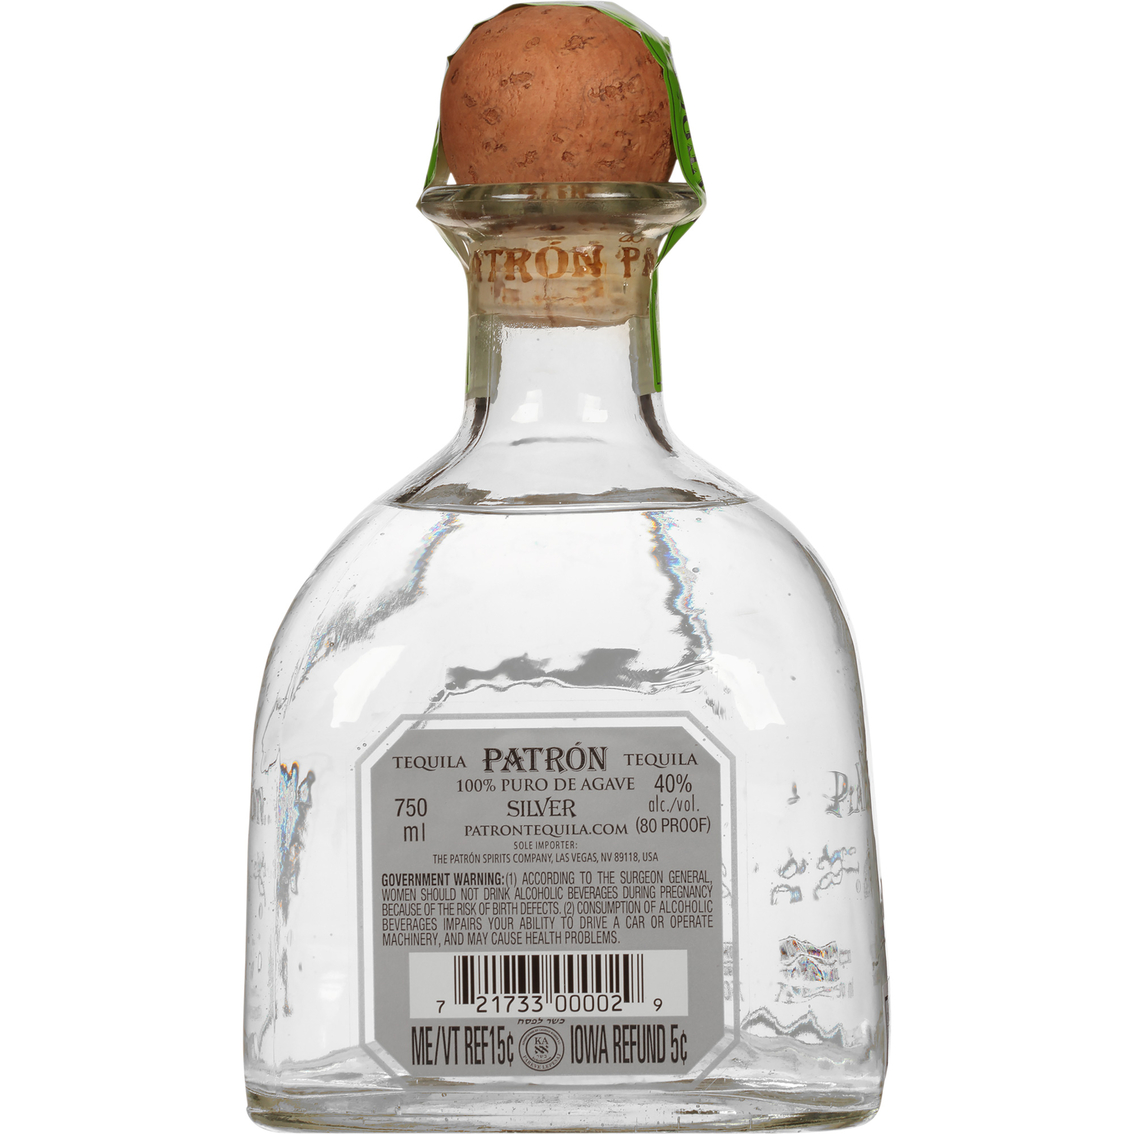 Patron Silver Tequila 750ml - Image 2 of 2